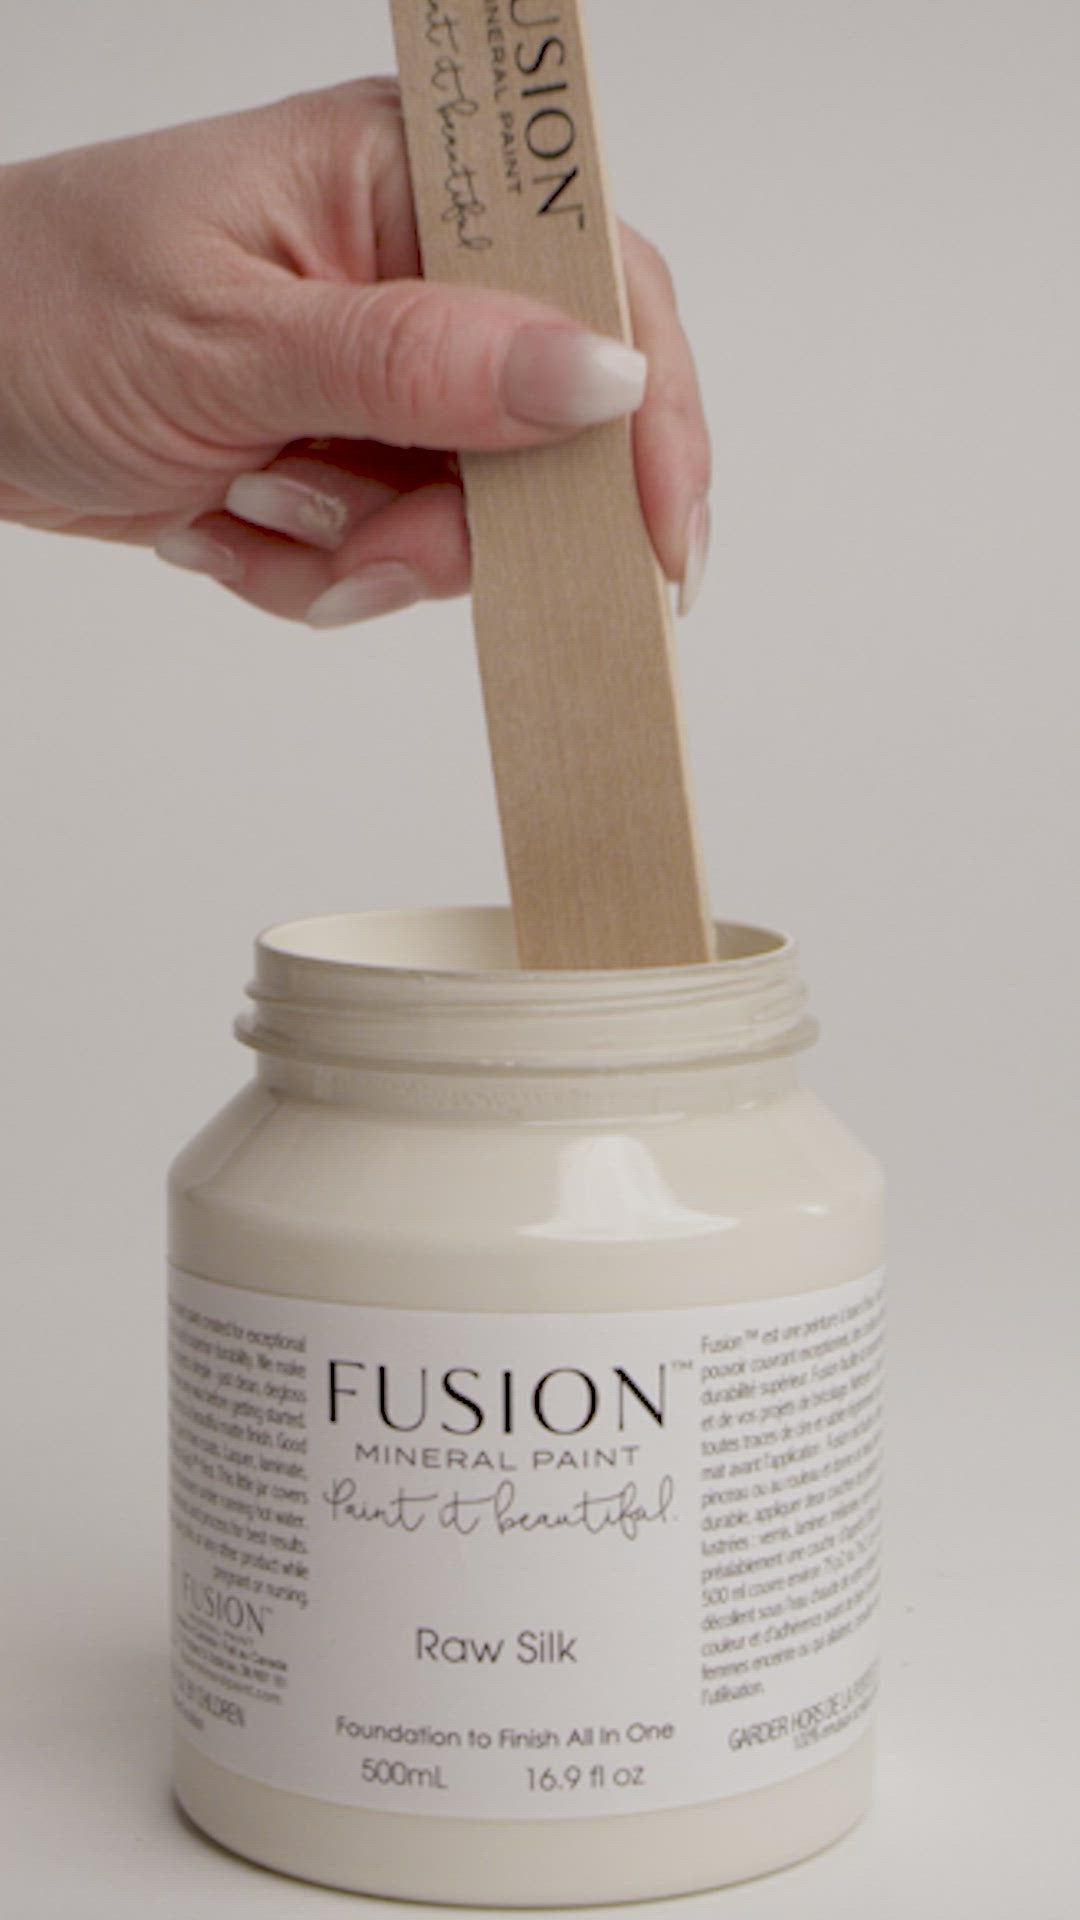 Fusion Mineral Paint Raw Silk - Honeycomb Creative & Co.